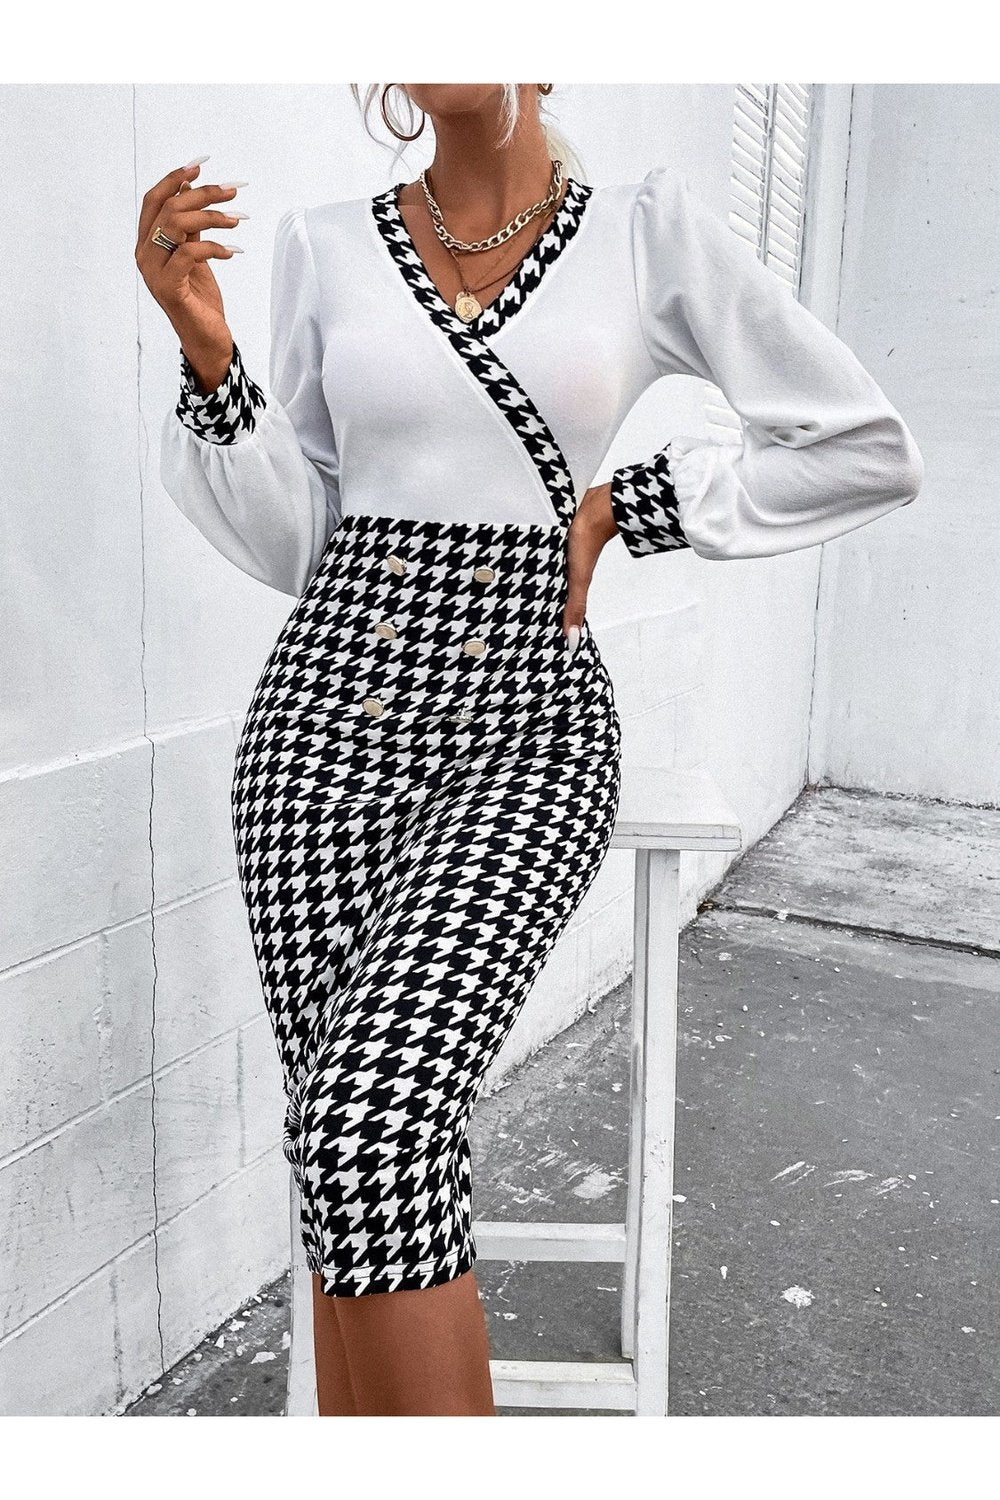 Houndstooth Long Sleeve Slit Dress - Casual & Maxi Dresses - FITGGINS